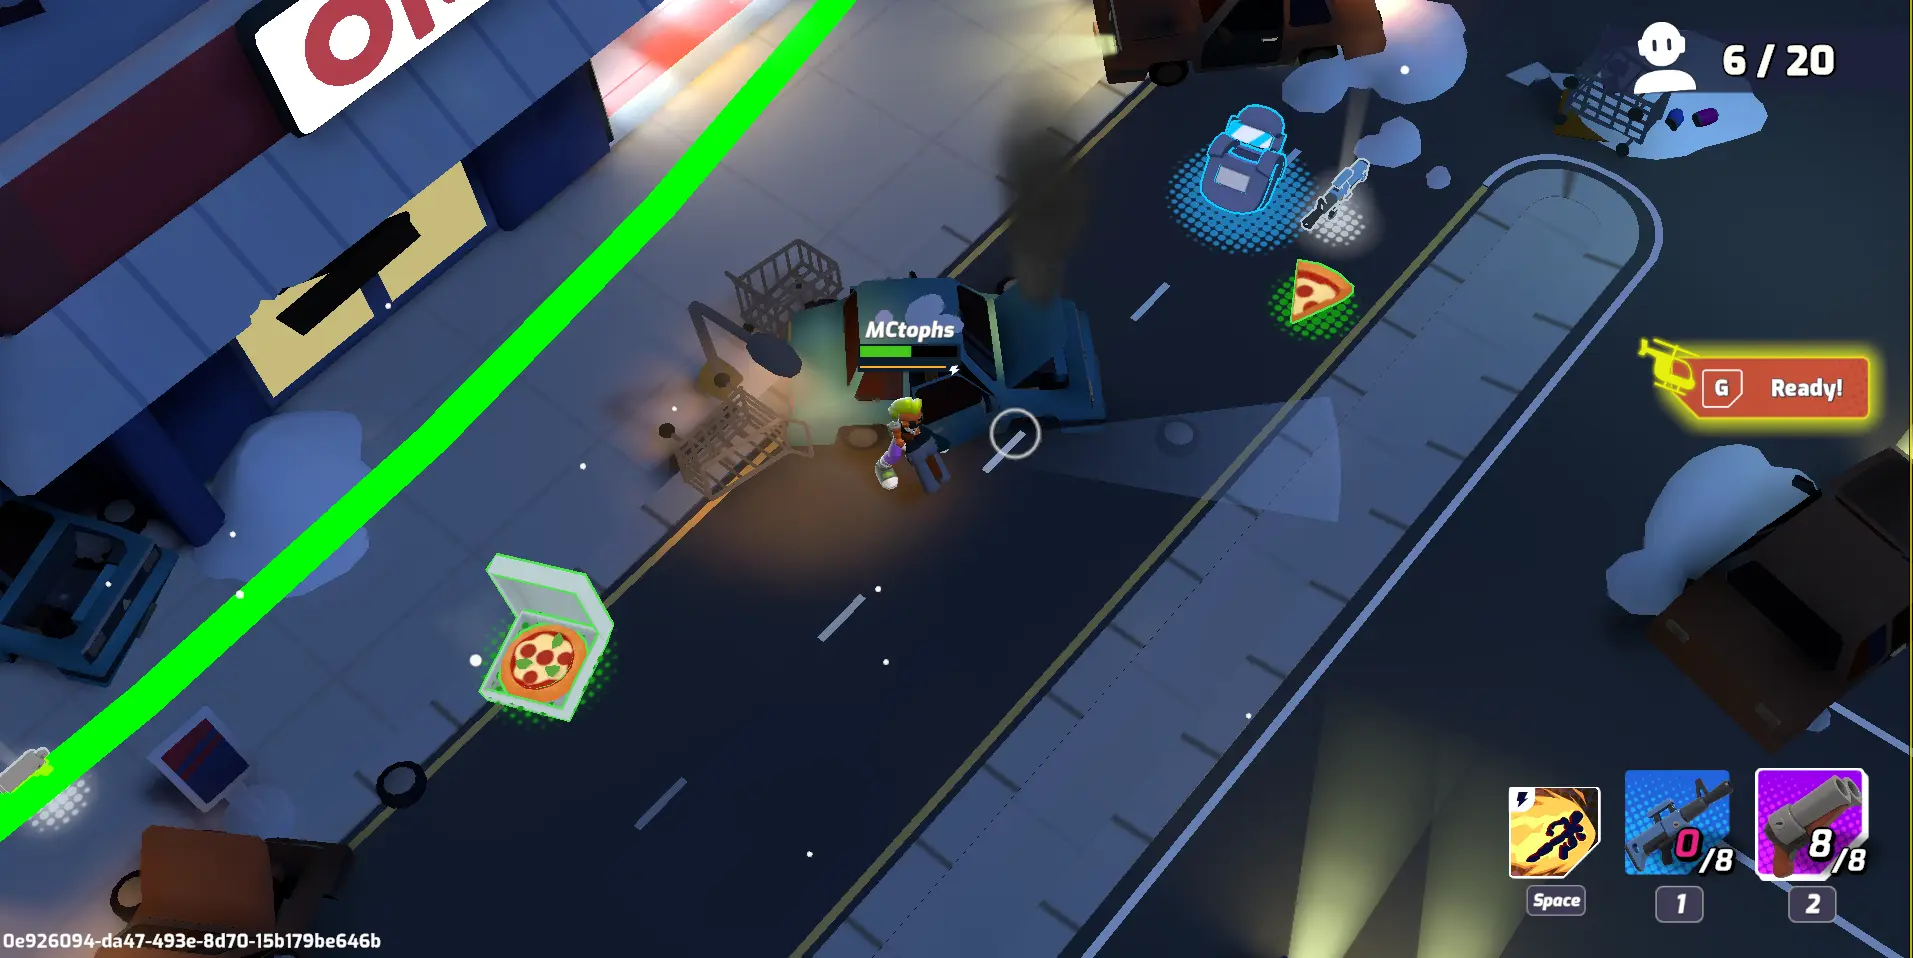 In Mighty Action Heroes, players have a variety of heroes to choose from. Players engage in a Battle Royale mode, striving to be the last person standing.